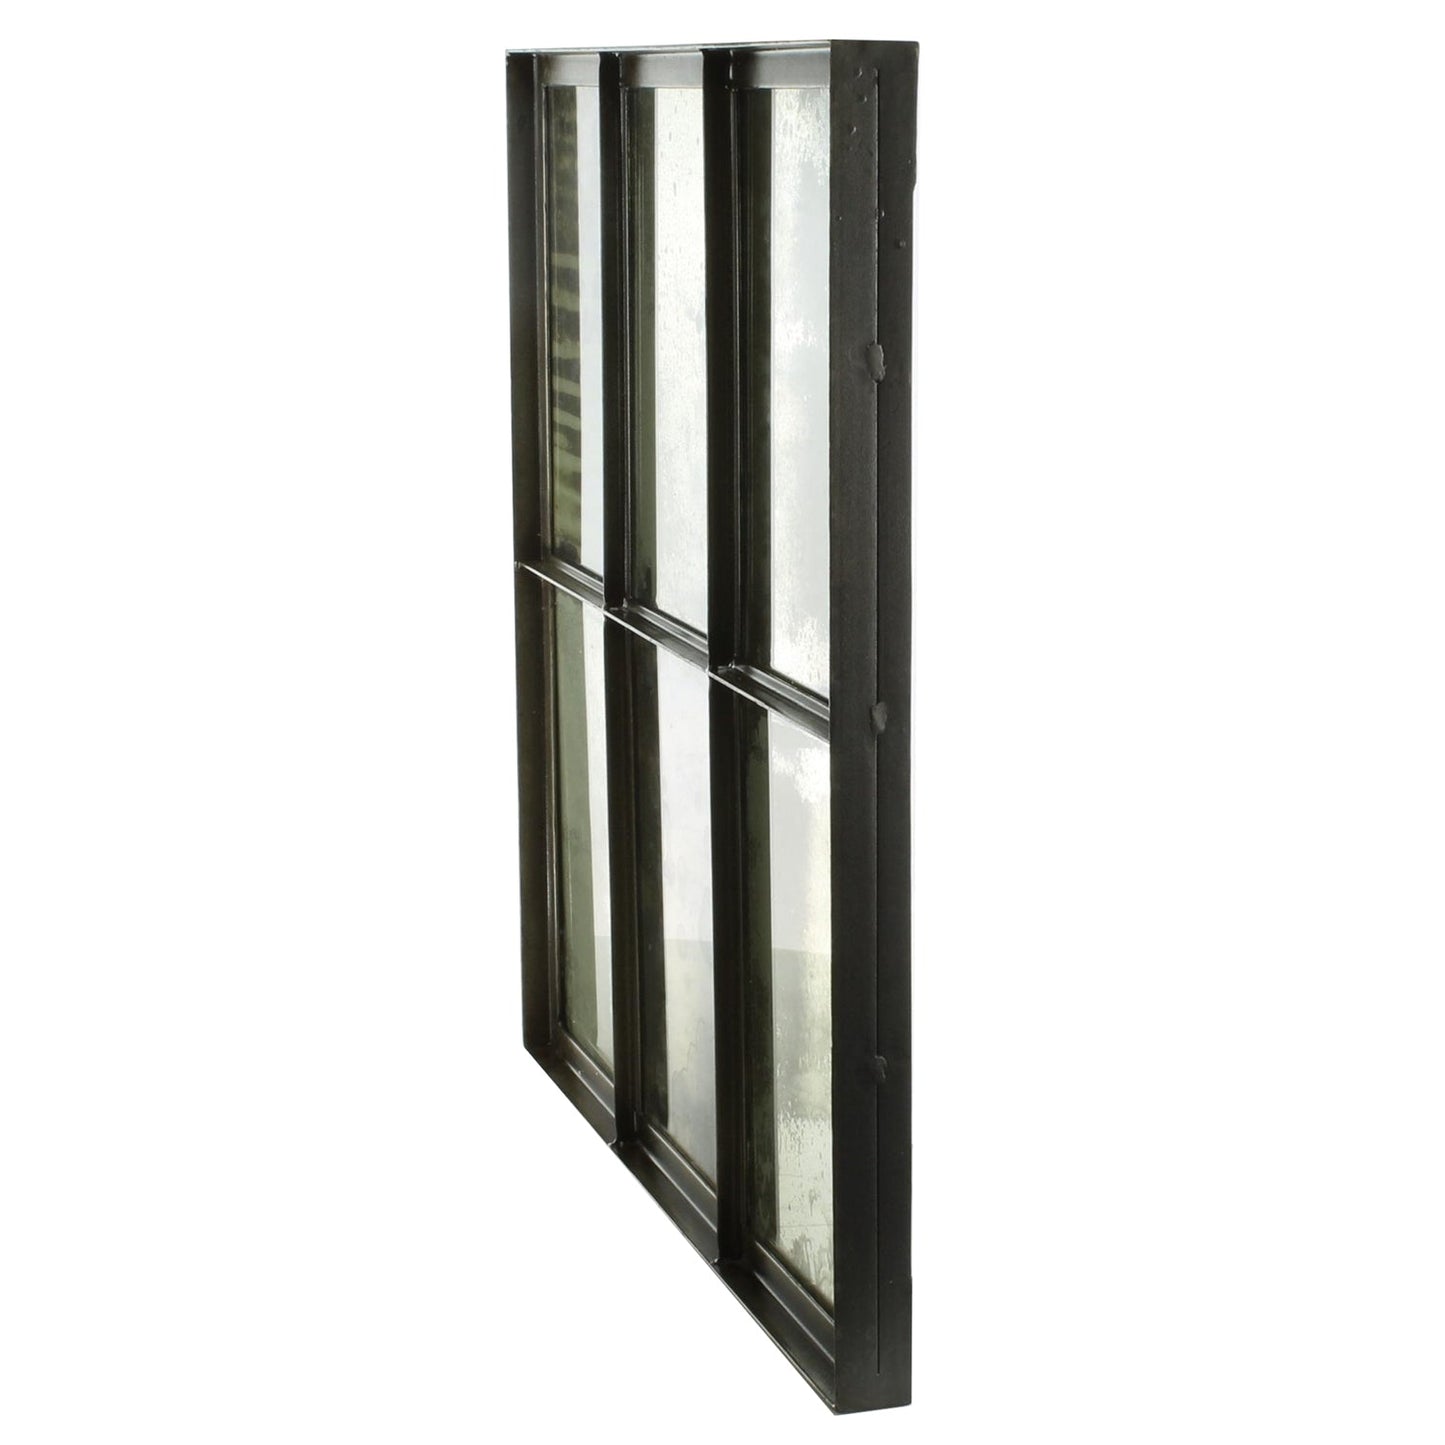 ‘Carrefour’ Iron Mirror, 6-Panes (Antique Nickel) - EcoLuxe Furnishings